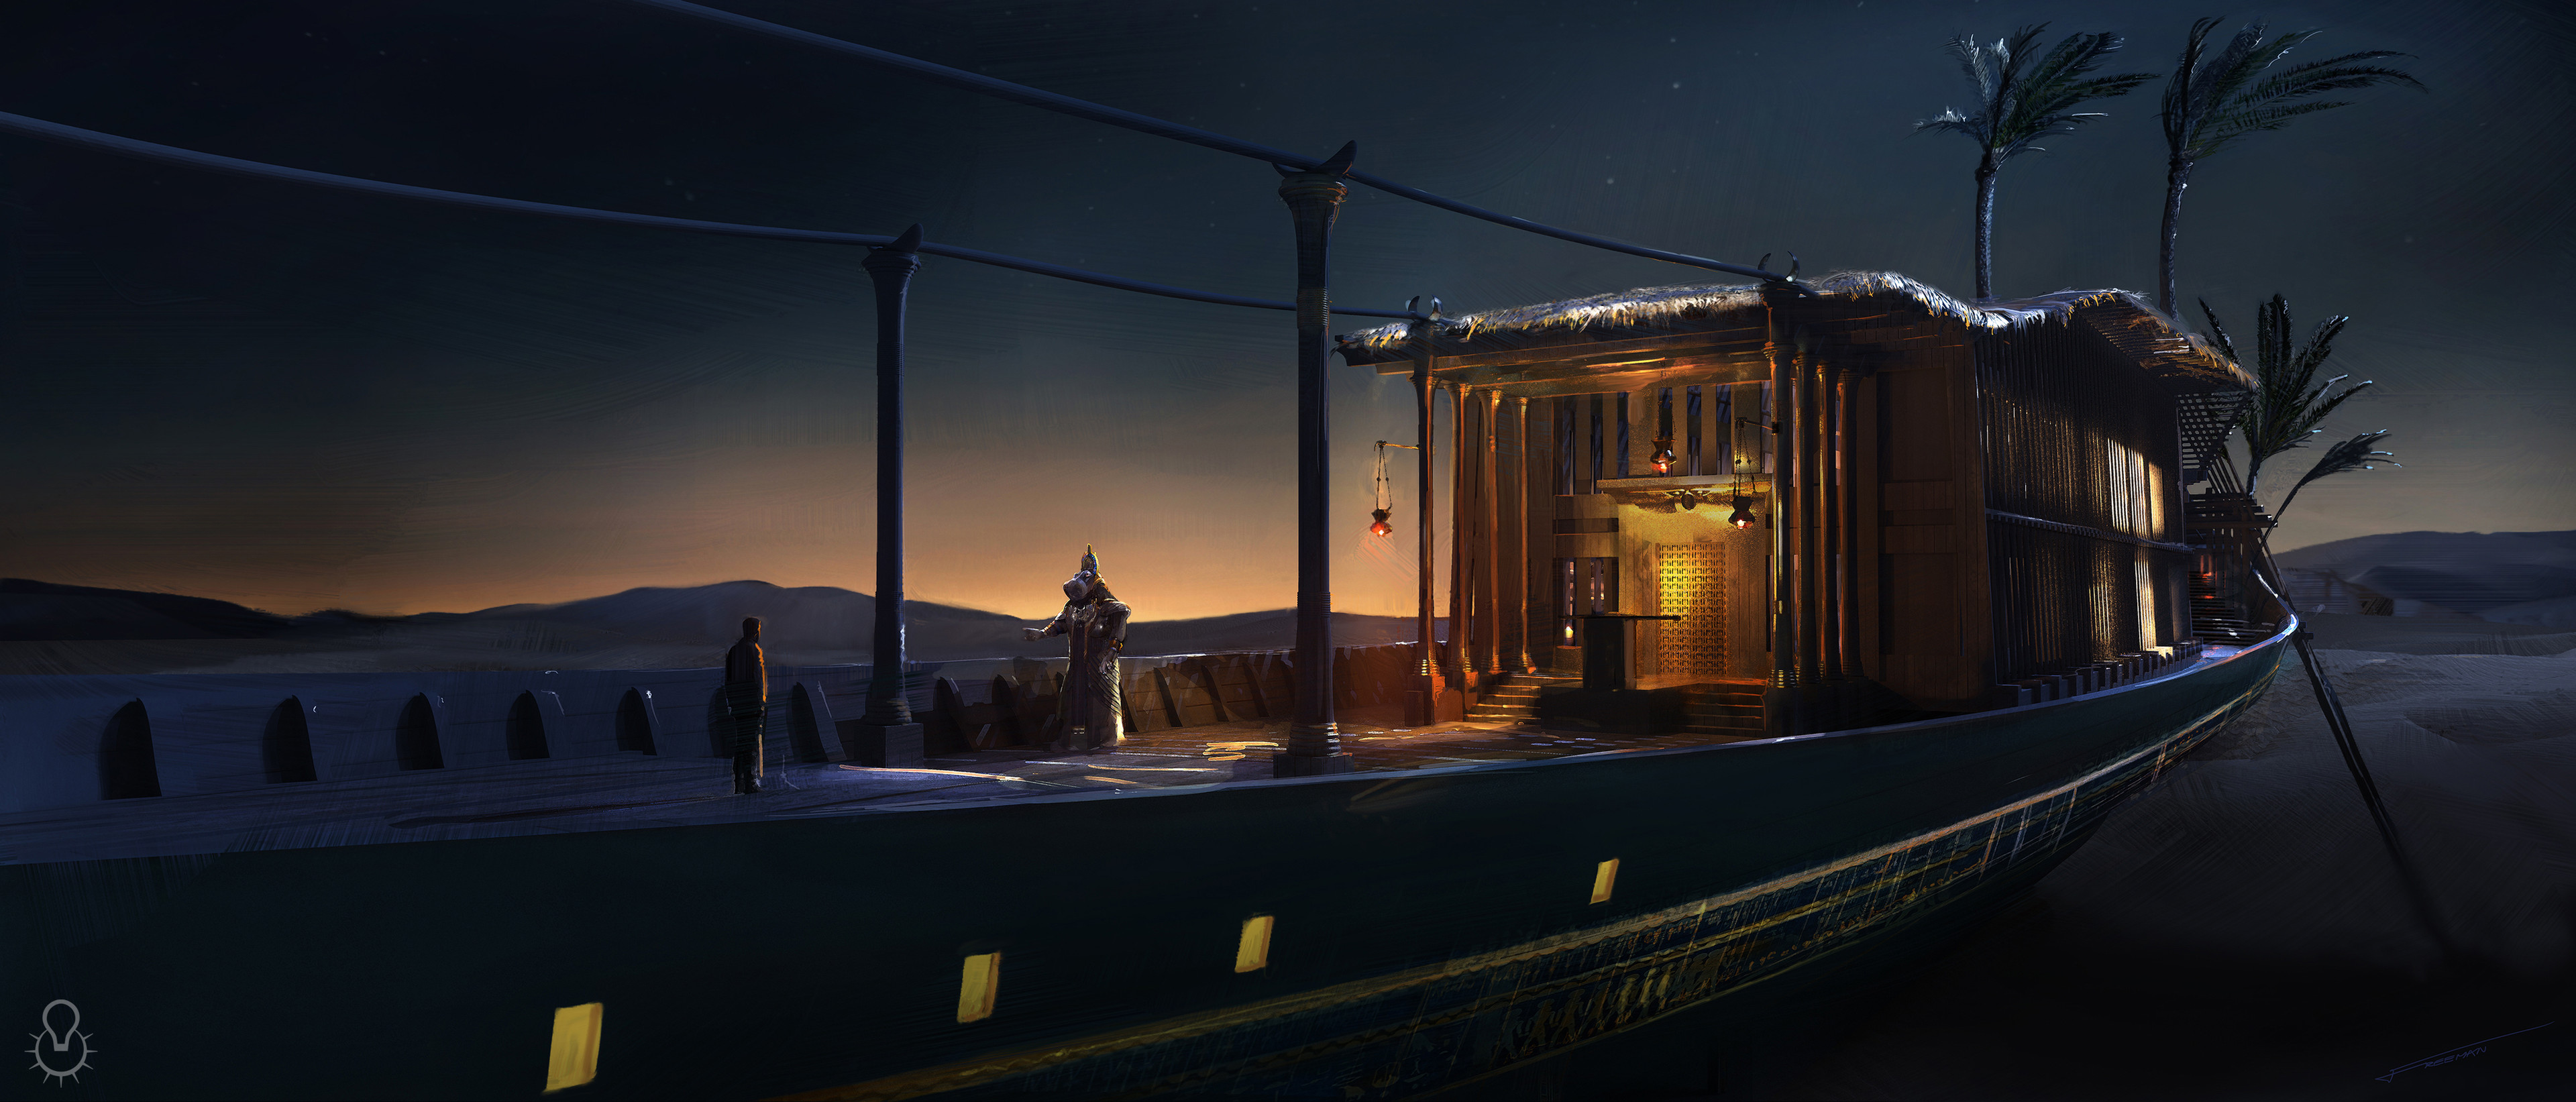 Closer study of the Barge bridge, looking at detailing (such as the golden doors) and lighting - both of the overall environment and of the barge itself.